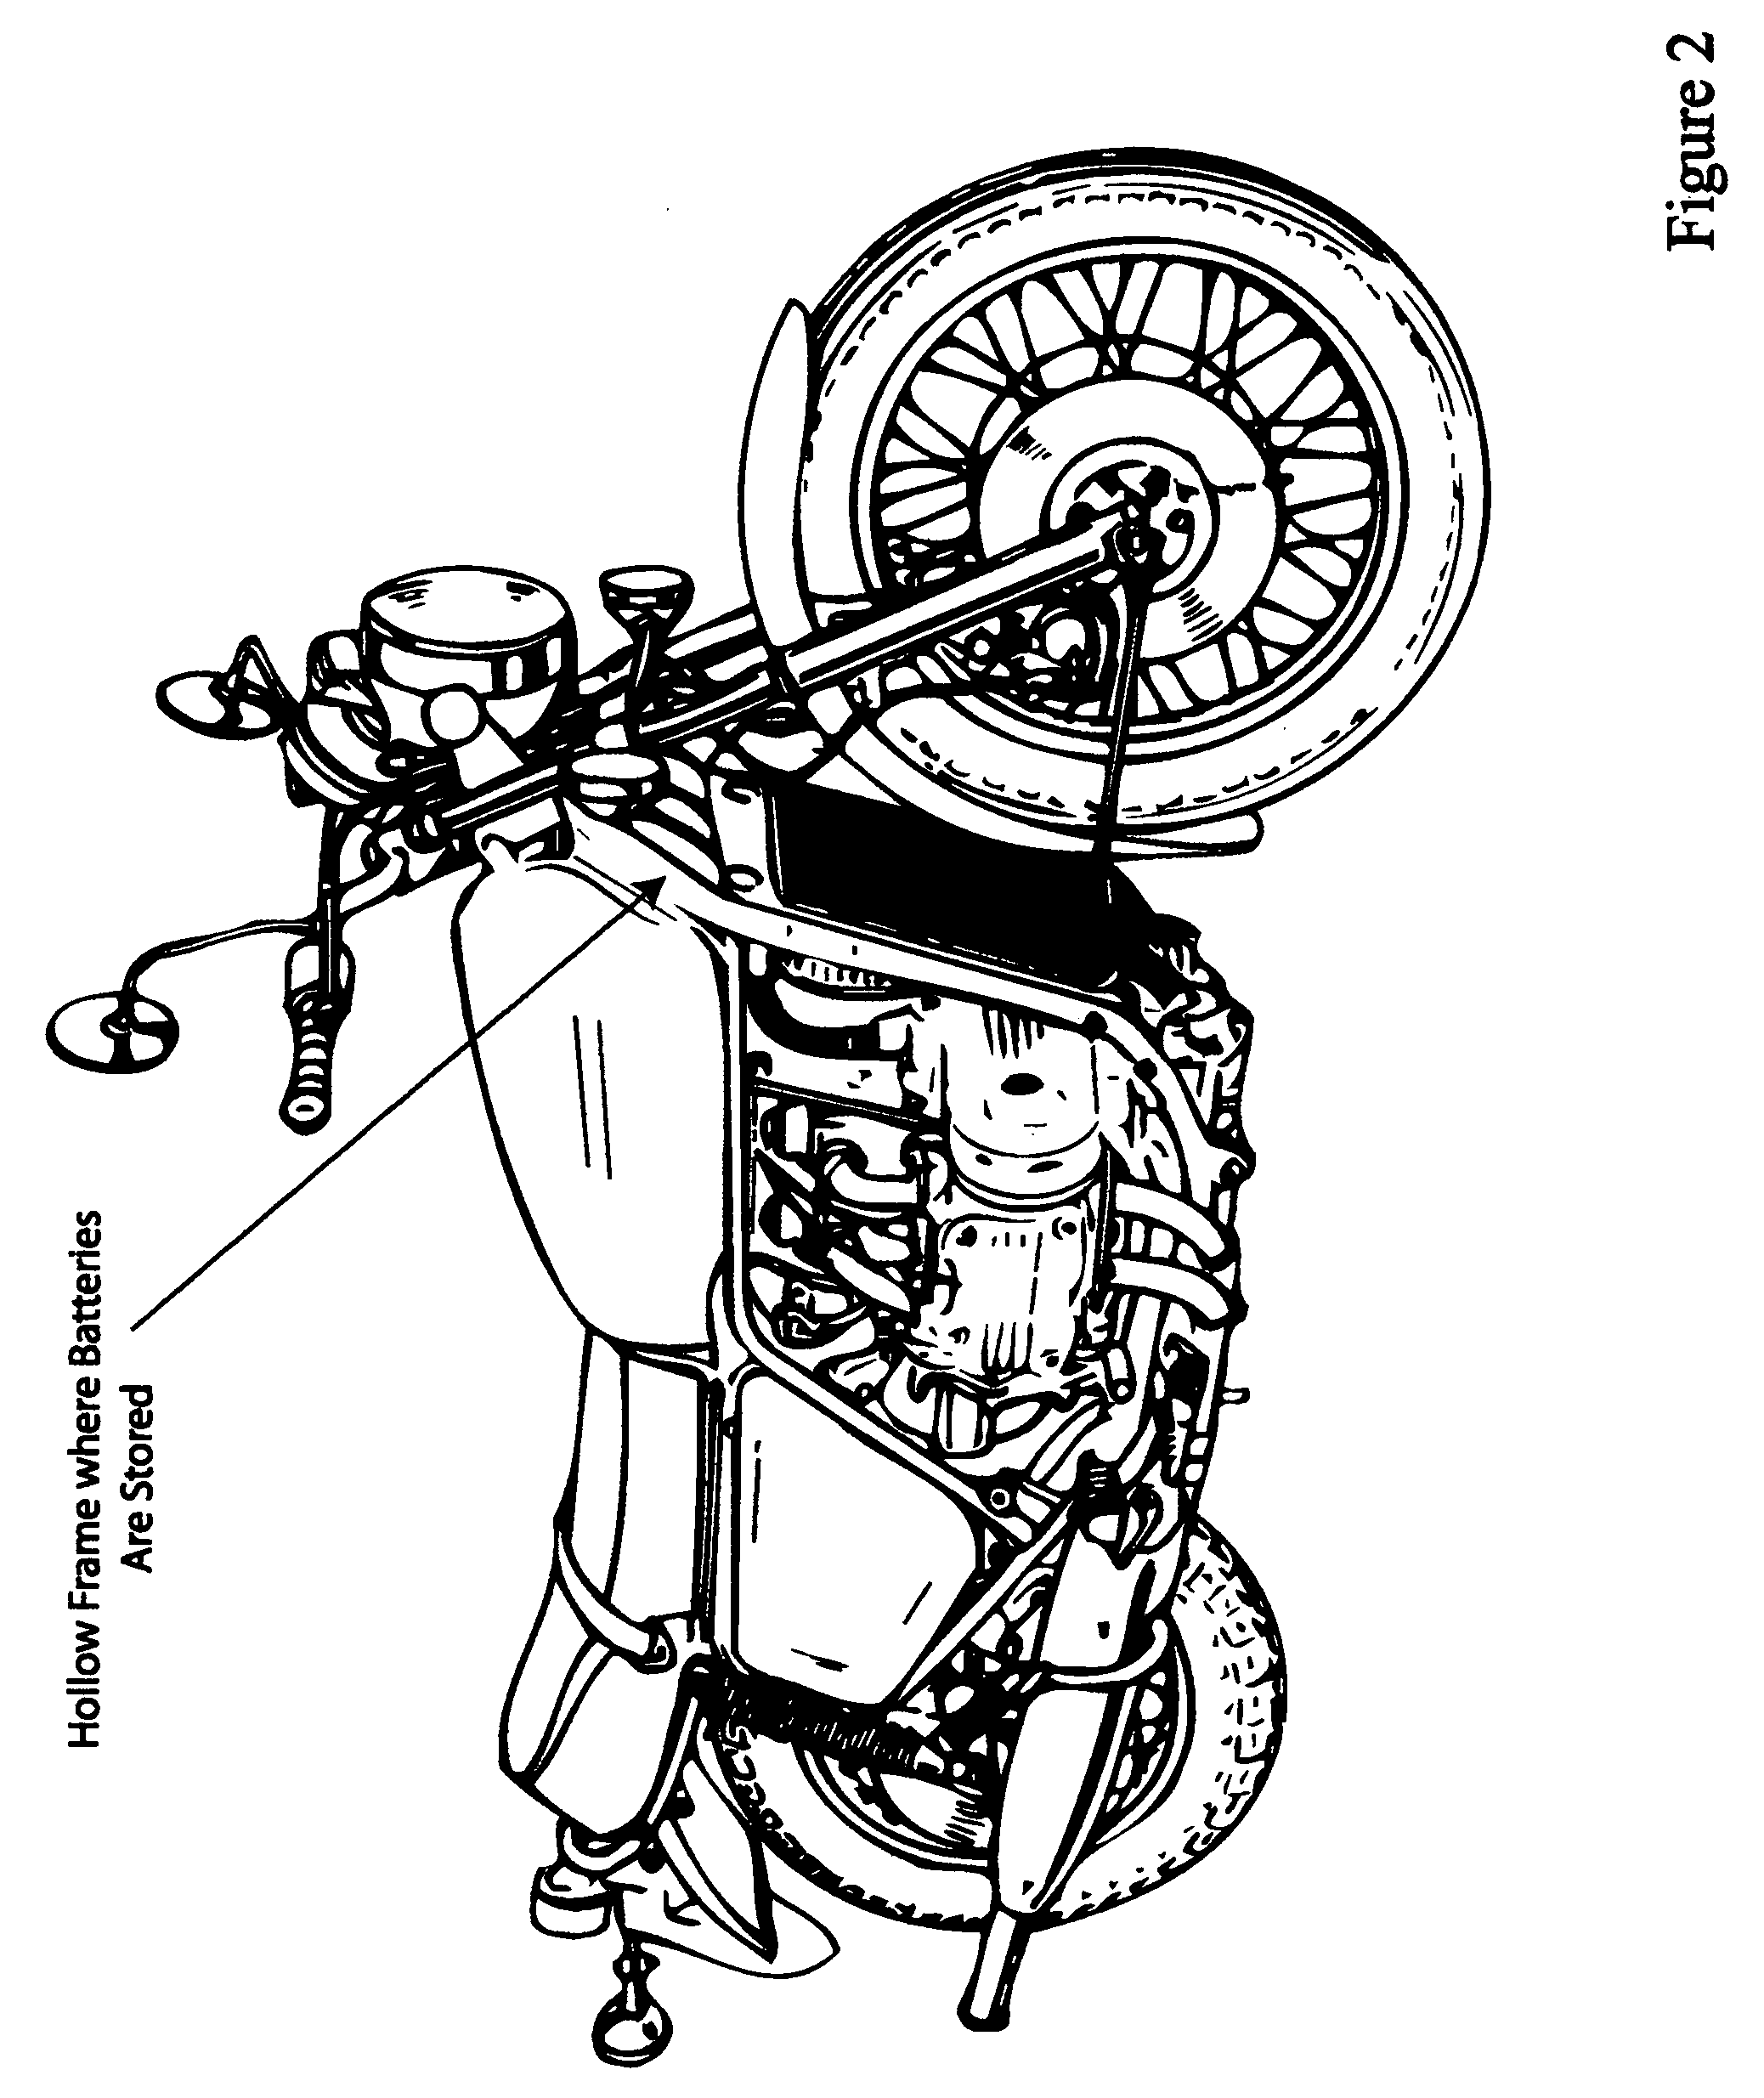 Methods and devices to improve the electric and battery powered motorcycle